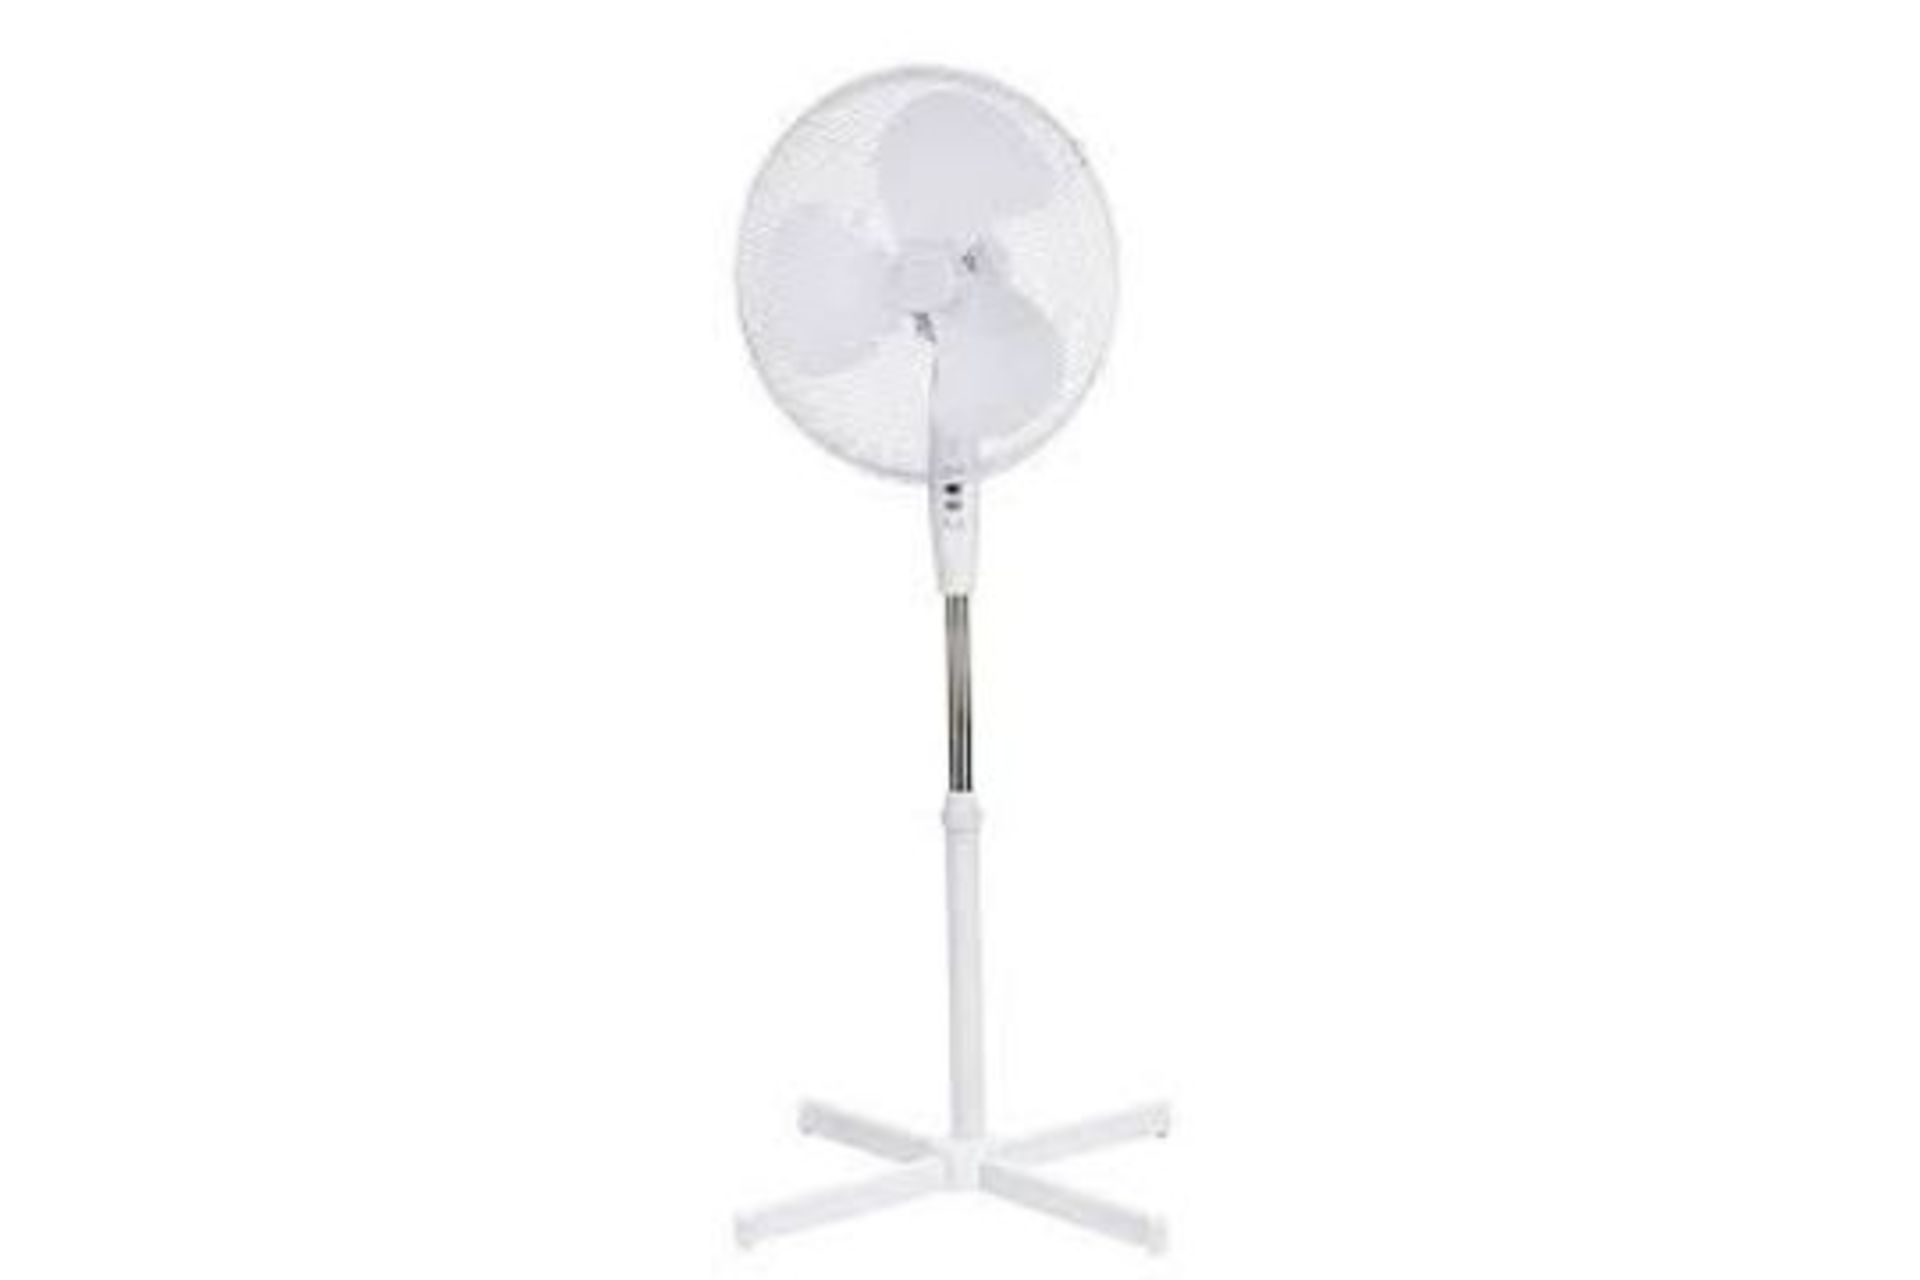 White 16" 40W Pedestal fan. - ER40. Keep your home cool with the help of this pedestal fan from